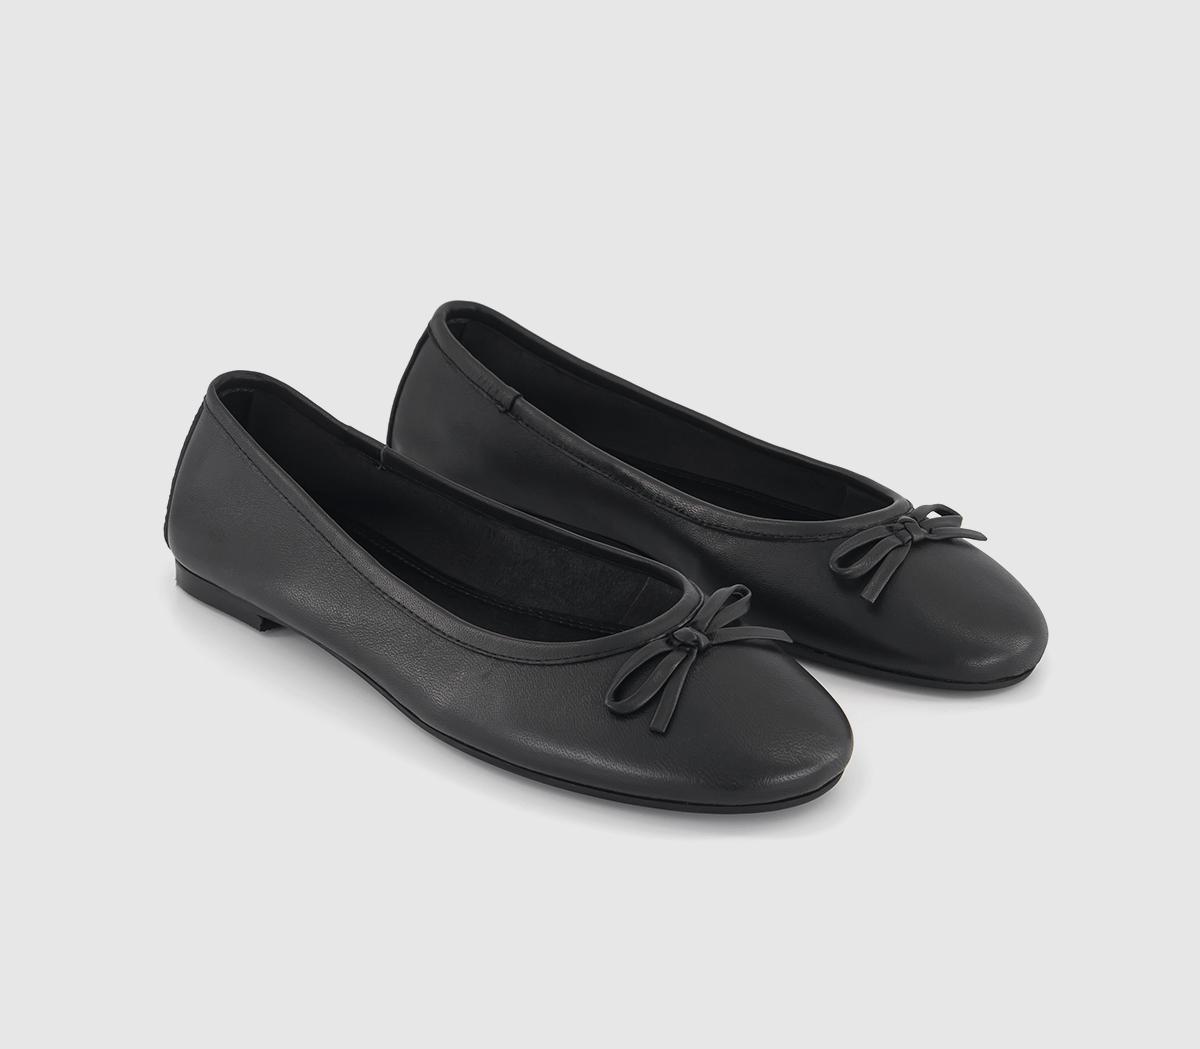 OFFICE Womens Frazzle Leather Ballerina Shoes Black, 5